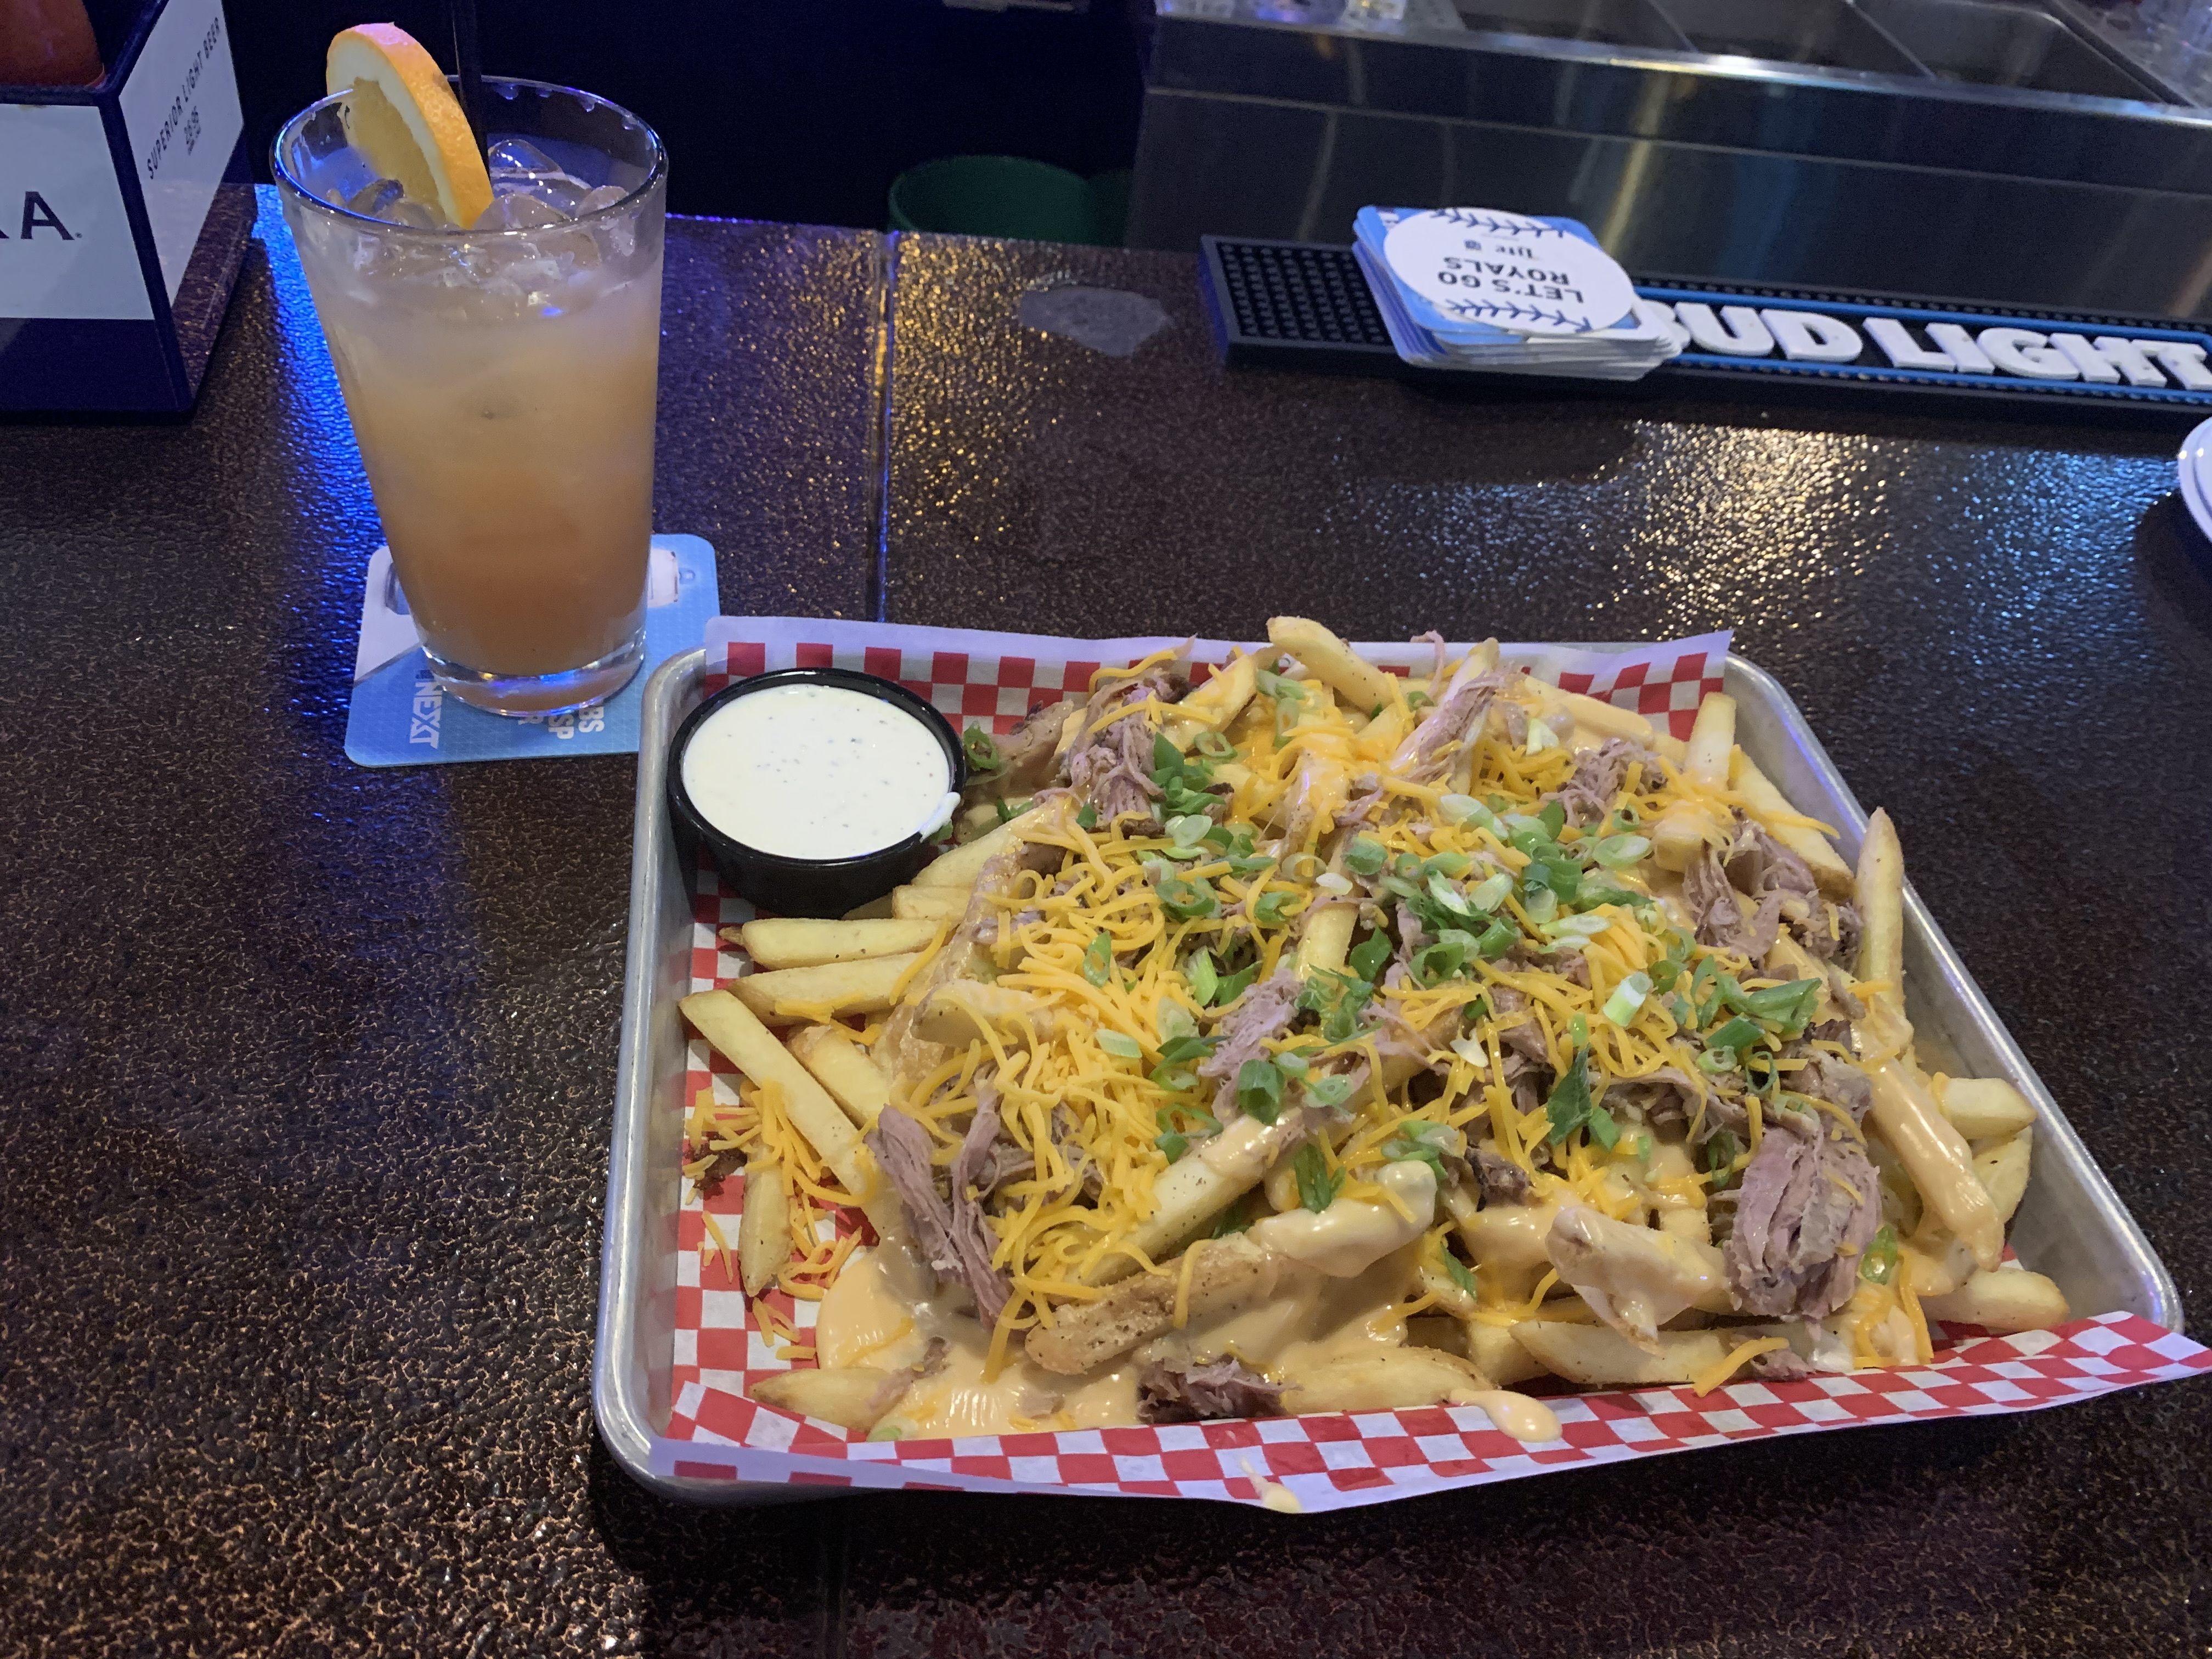 Cocktail and cheese fries with pulled pork